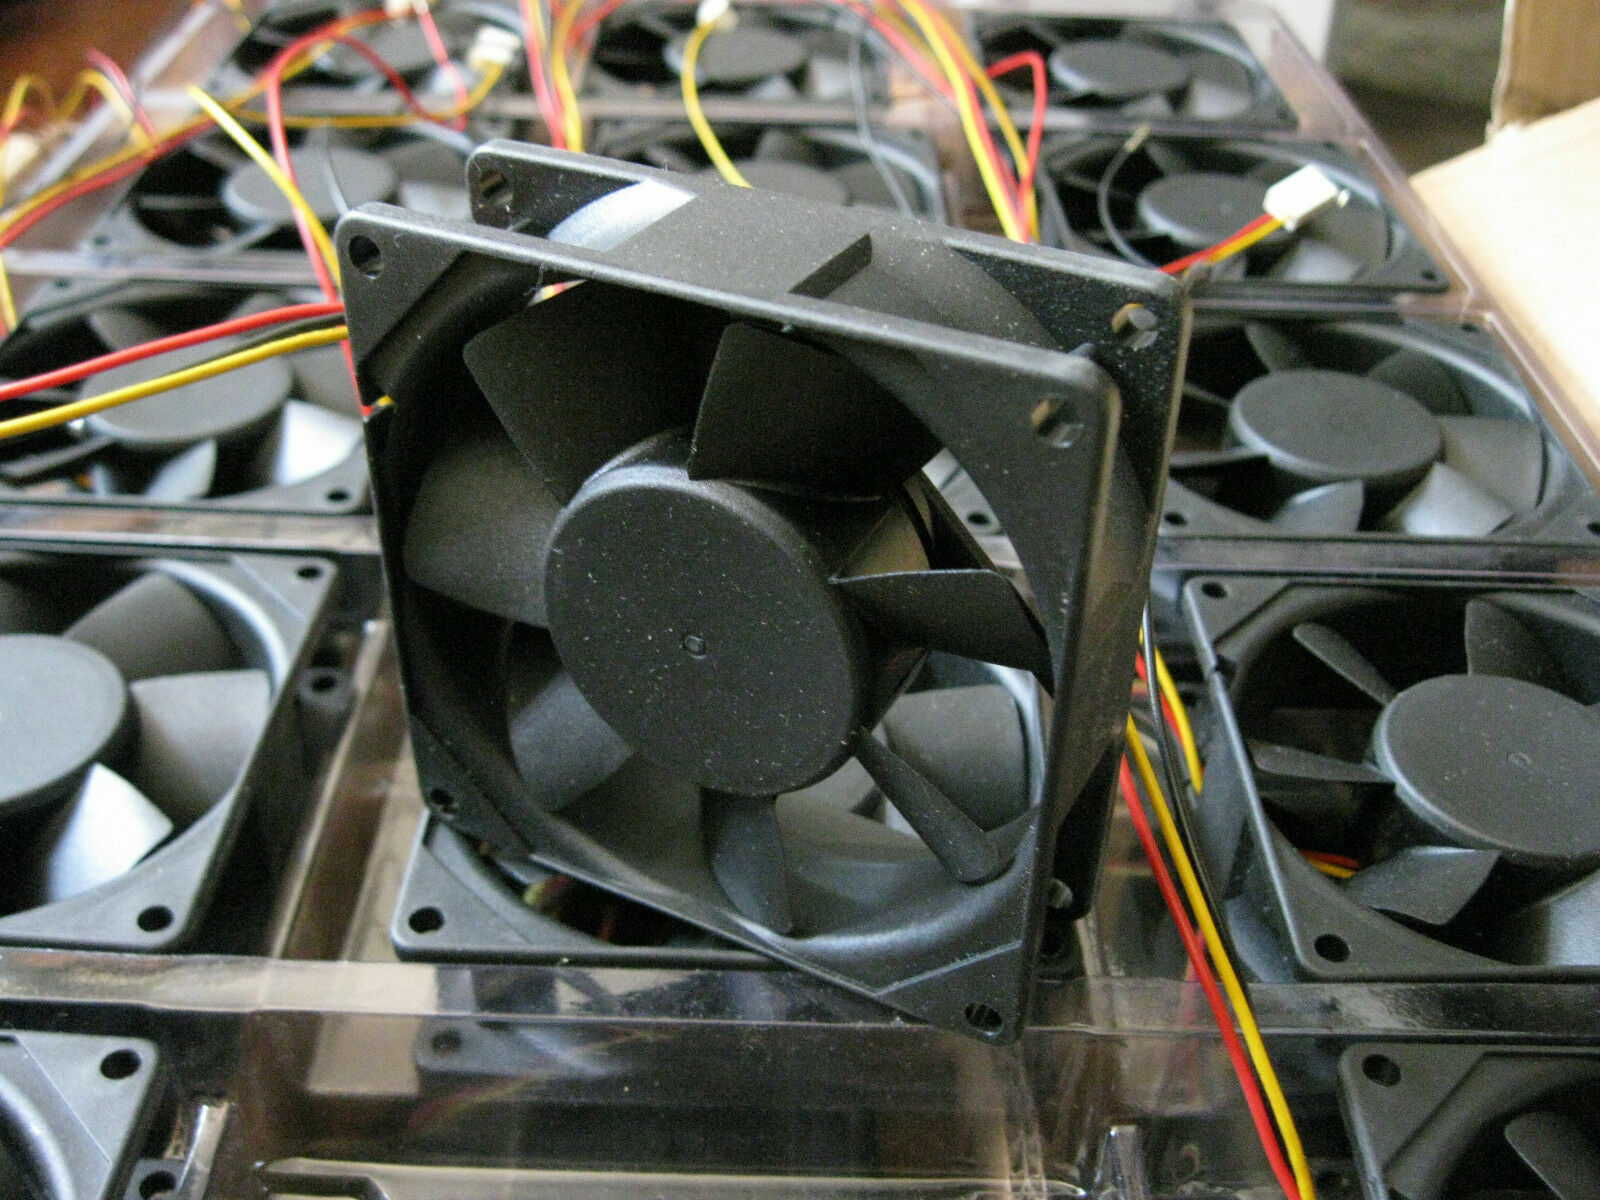 1x OEM Plug-n-Play New Replacement fan for Avaya G700